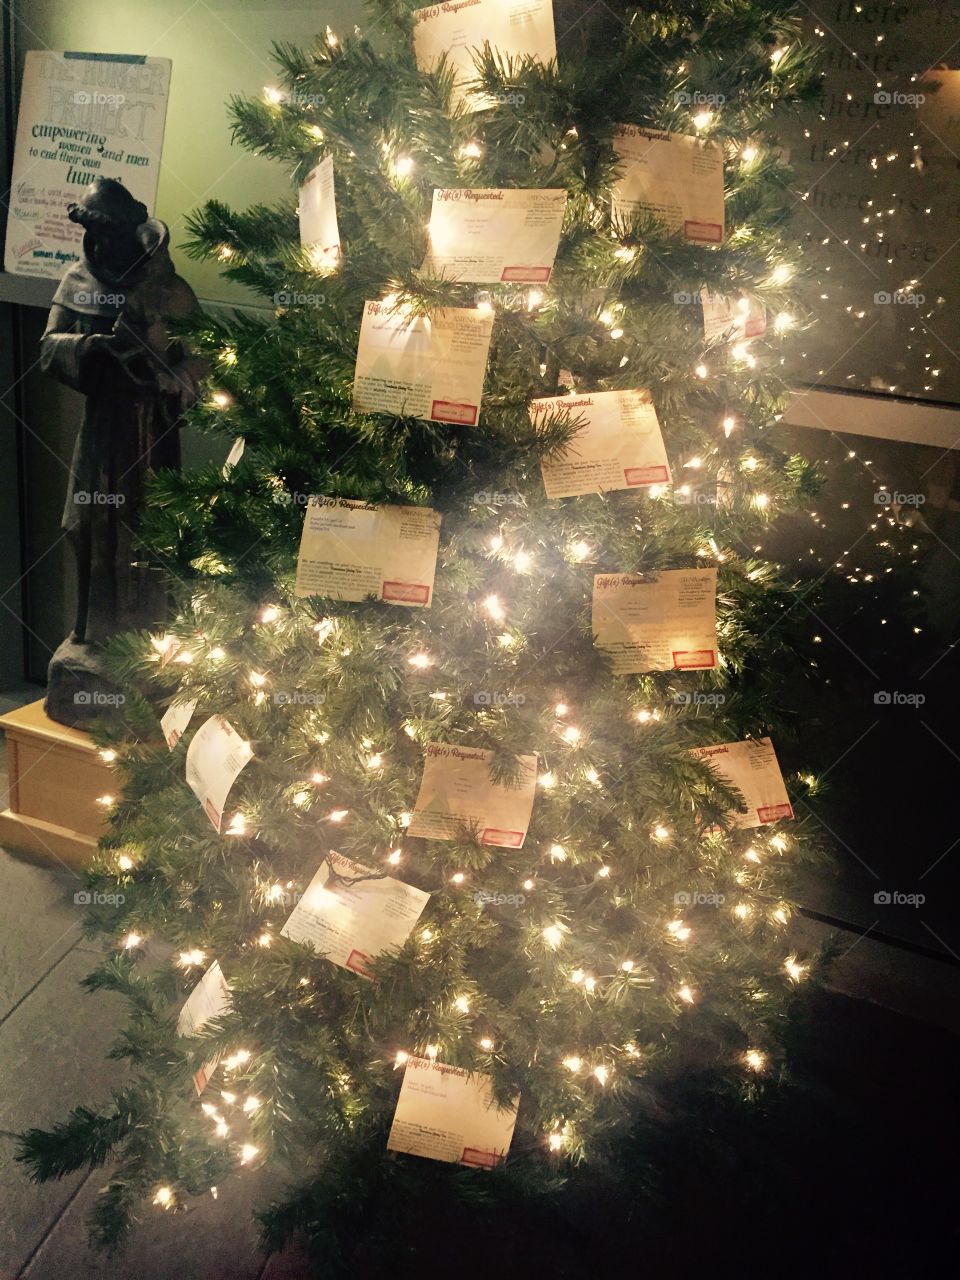 The Franciscan Giving Tree at my college. If you're feeling generous this year, just take a card and fulfill the wish  of someone less fortunate! 